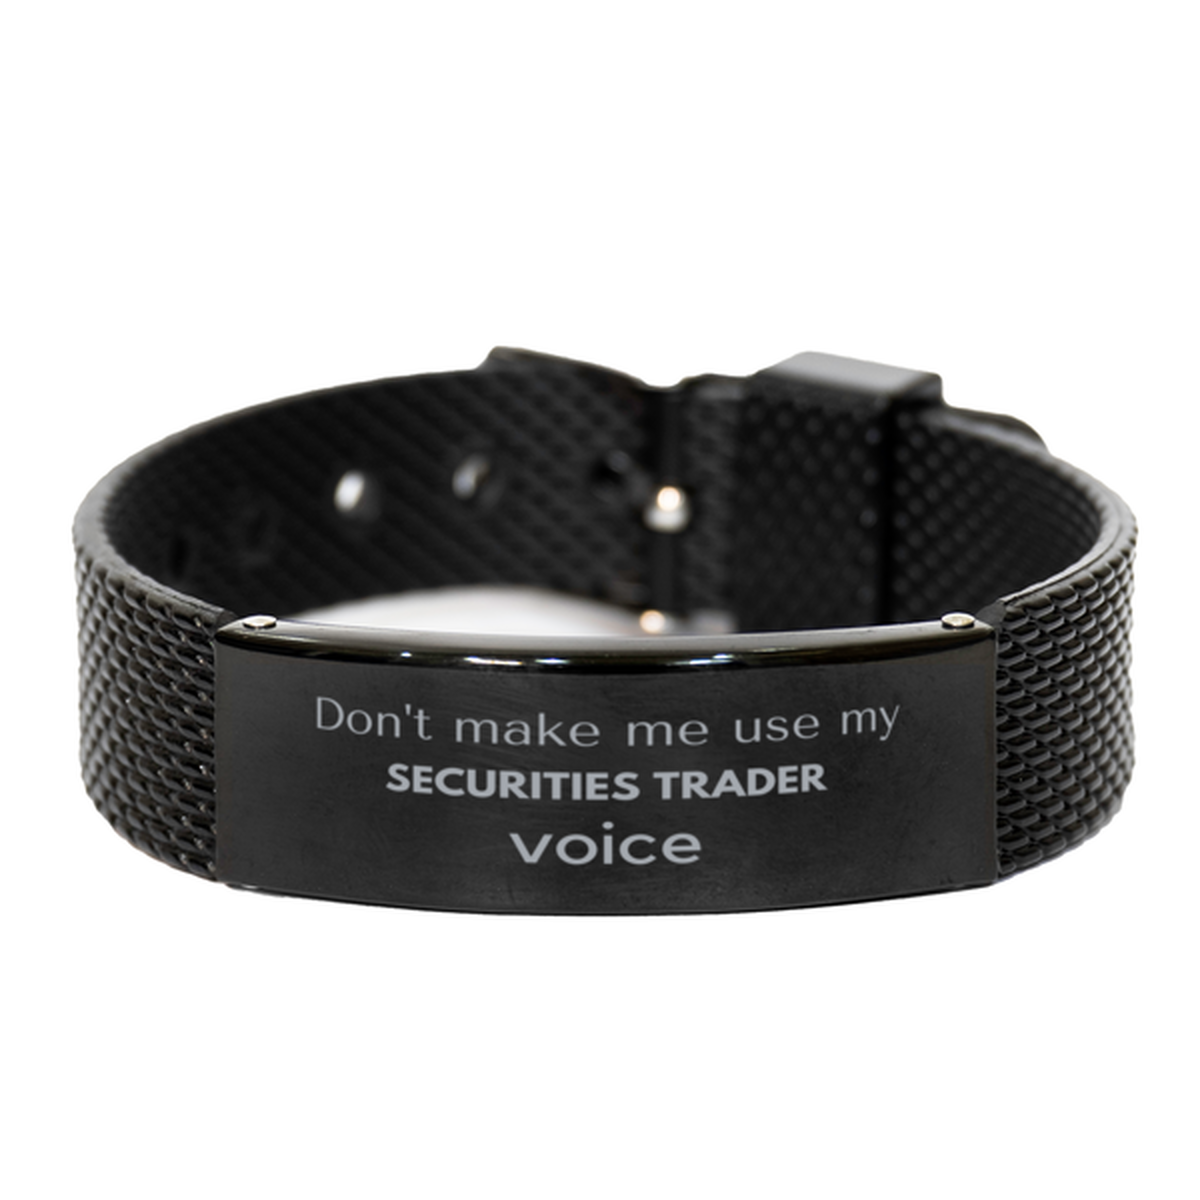 Don't make me use my Securities Trader voice, Sarcasm Securities Trader Gifts, Christmas Securities Trader Black Shark Mesh Bracelet Birthday Unique Gifts For Securities Trader Coworkers, Men, Women, Colleague, Friends